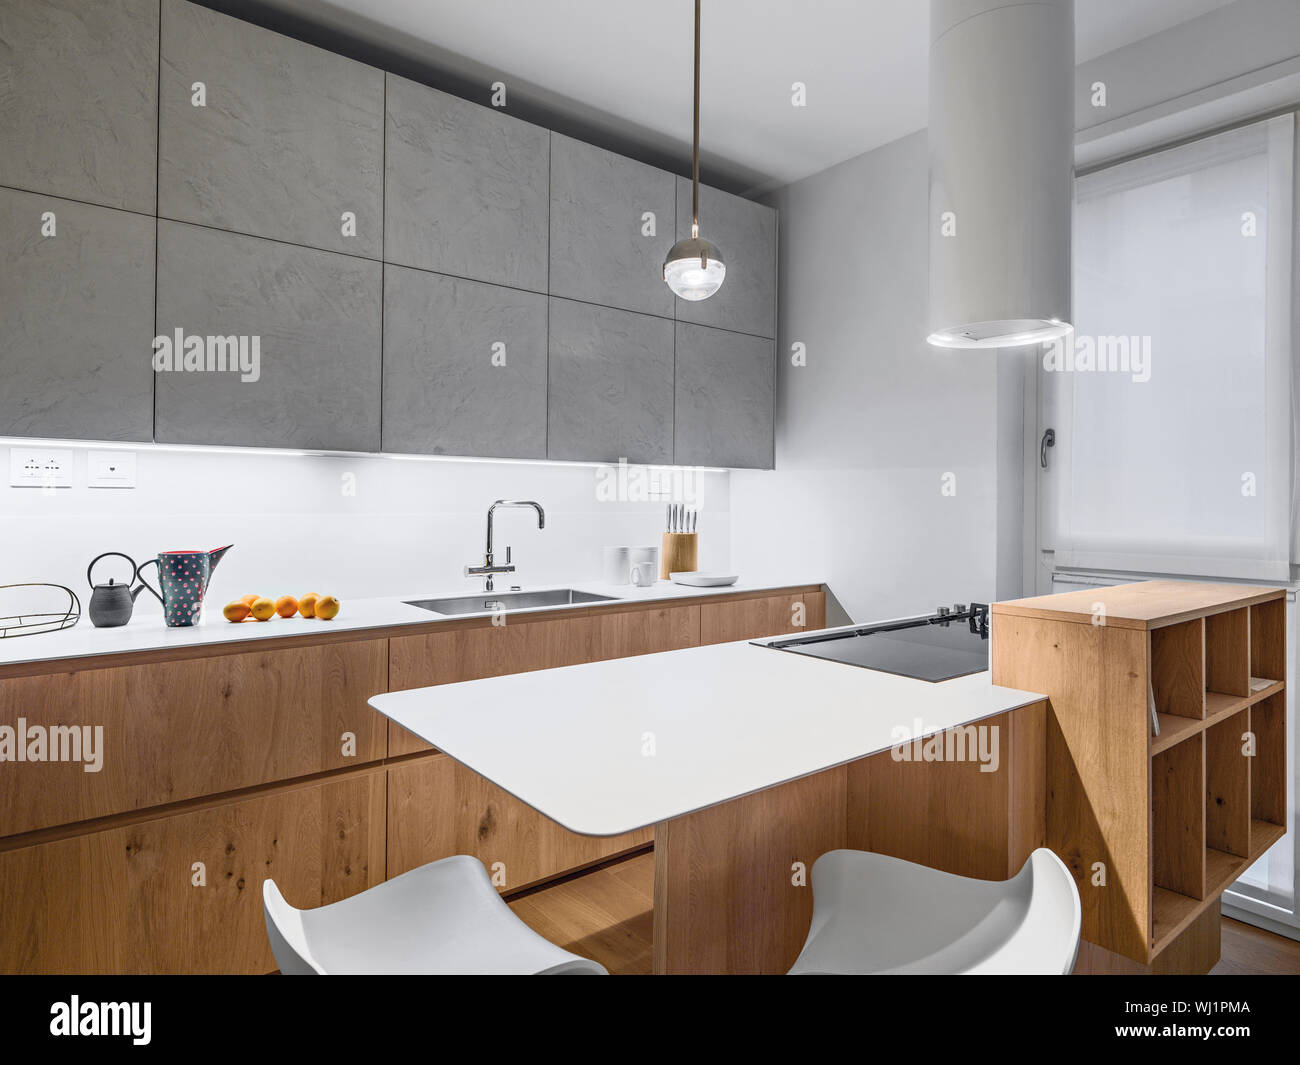 interiors shots of a modern wooden kitchen in foreground the kitcehn island Stock Photo